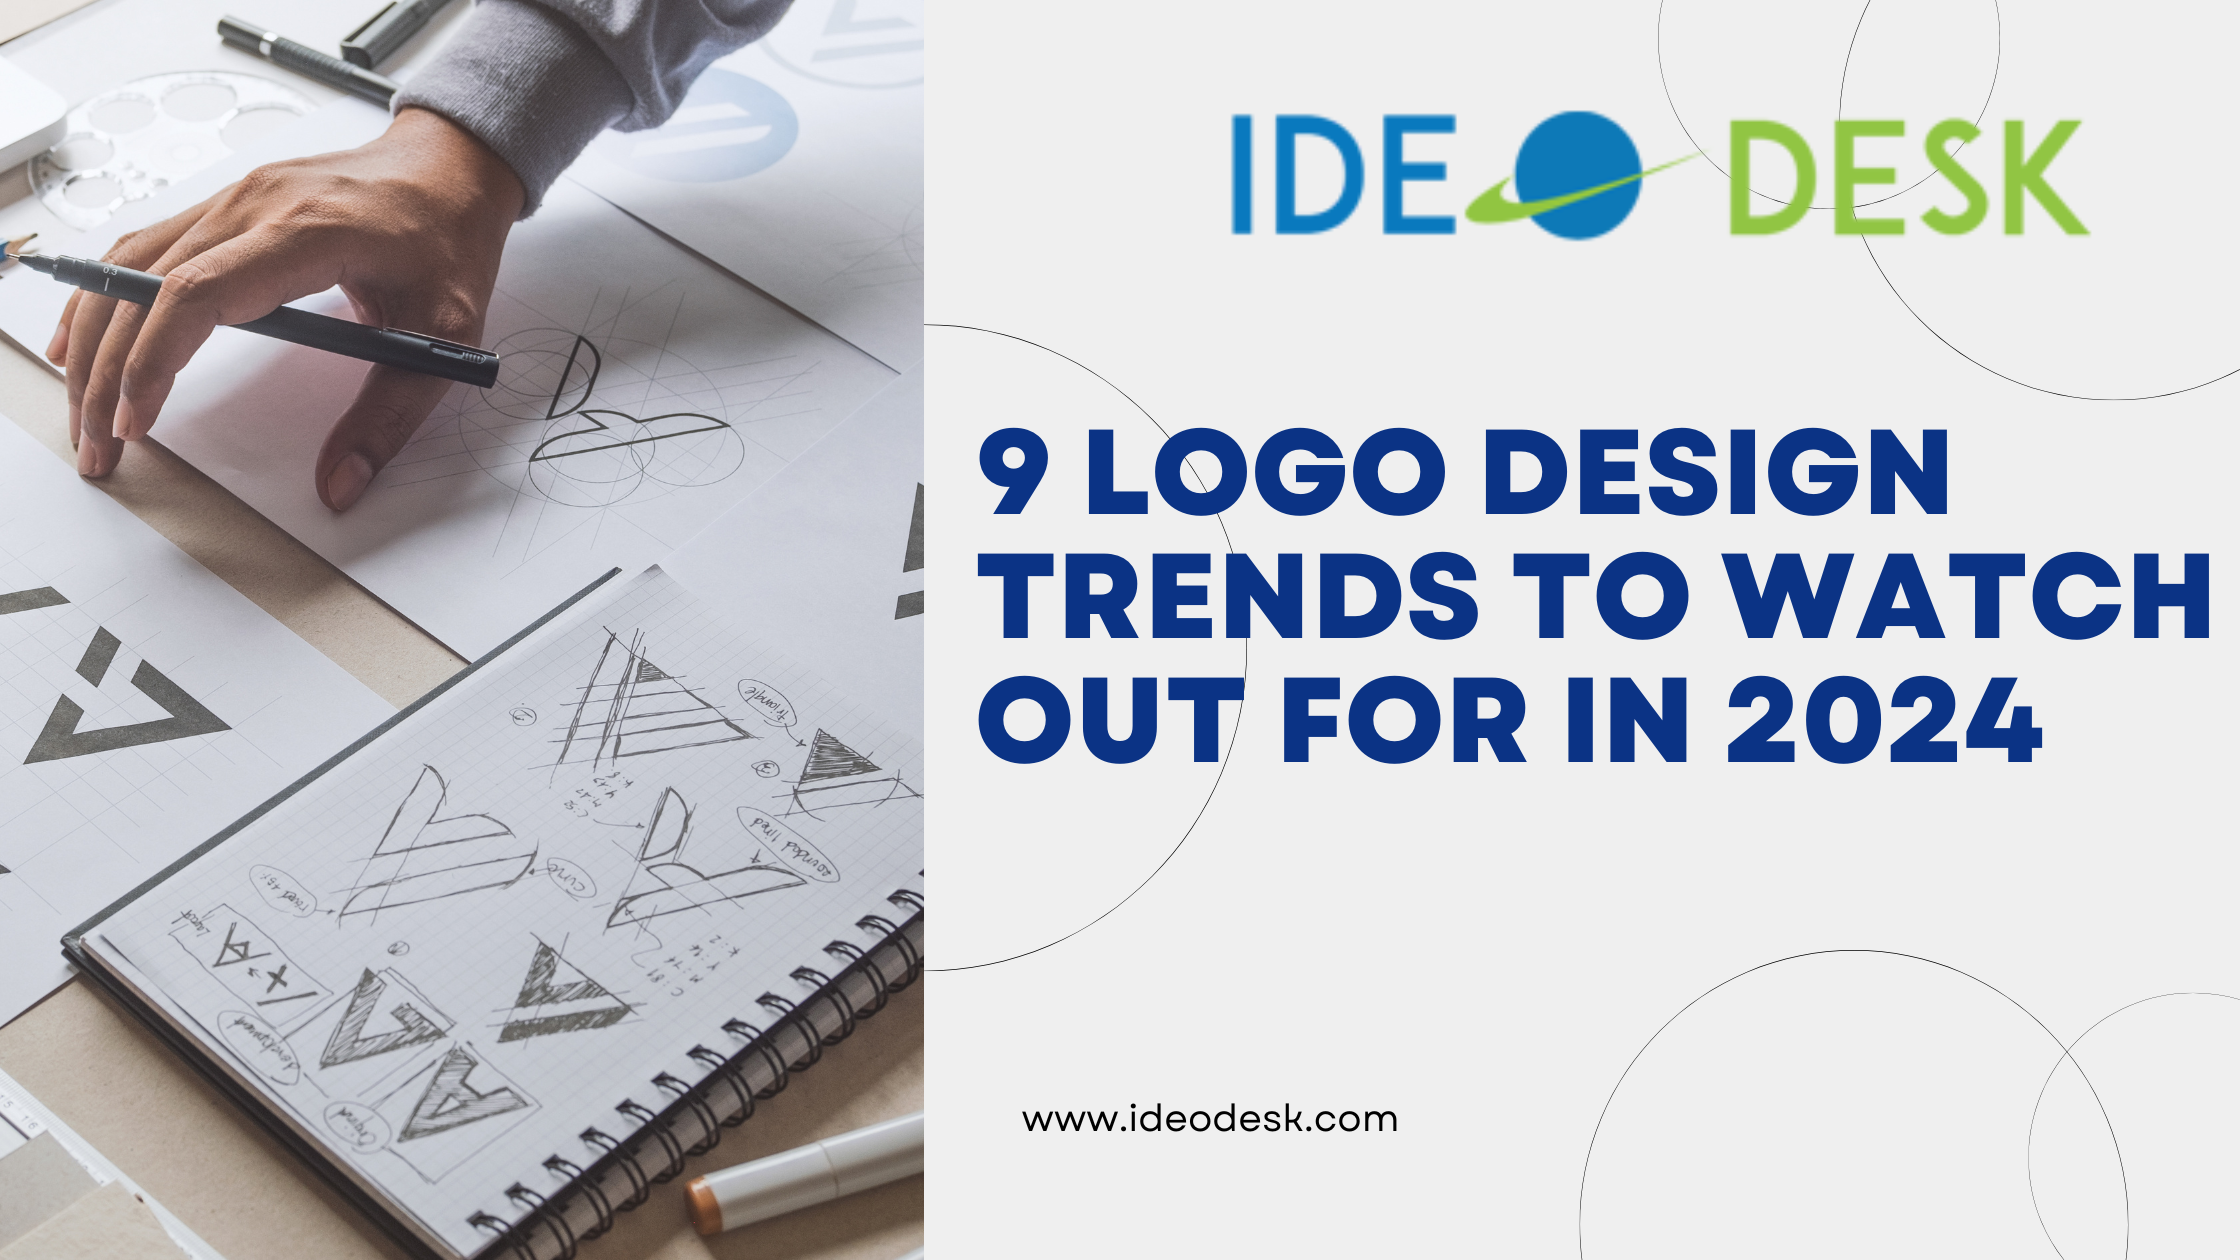 You are currently viewing 9 Logo Design Trends to Watch Out For in 2024